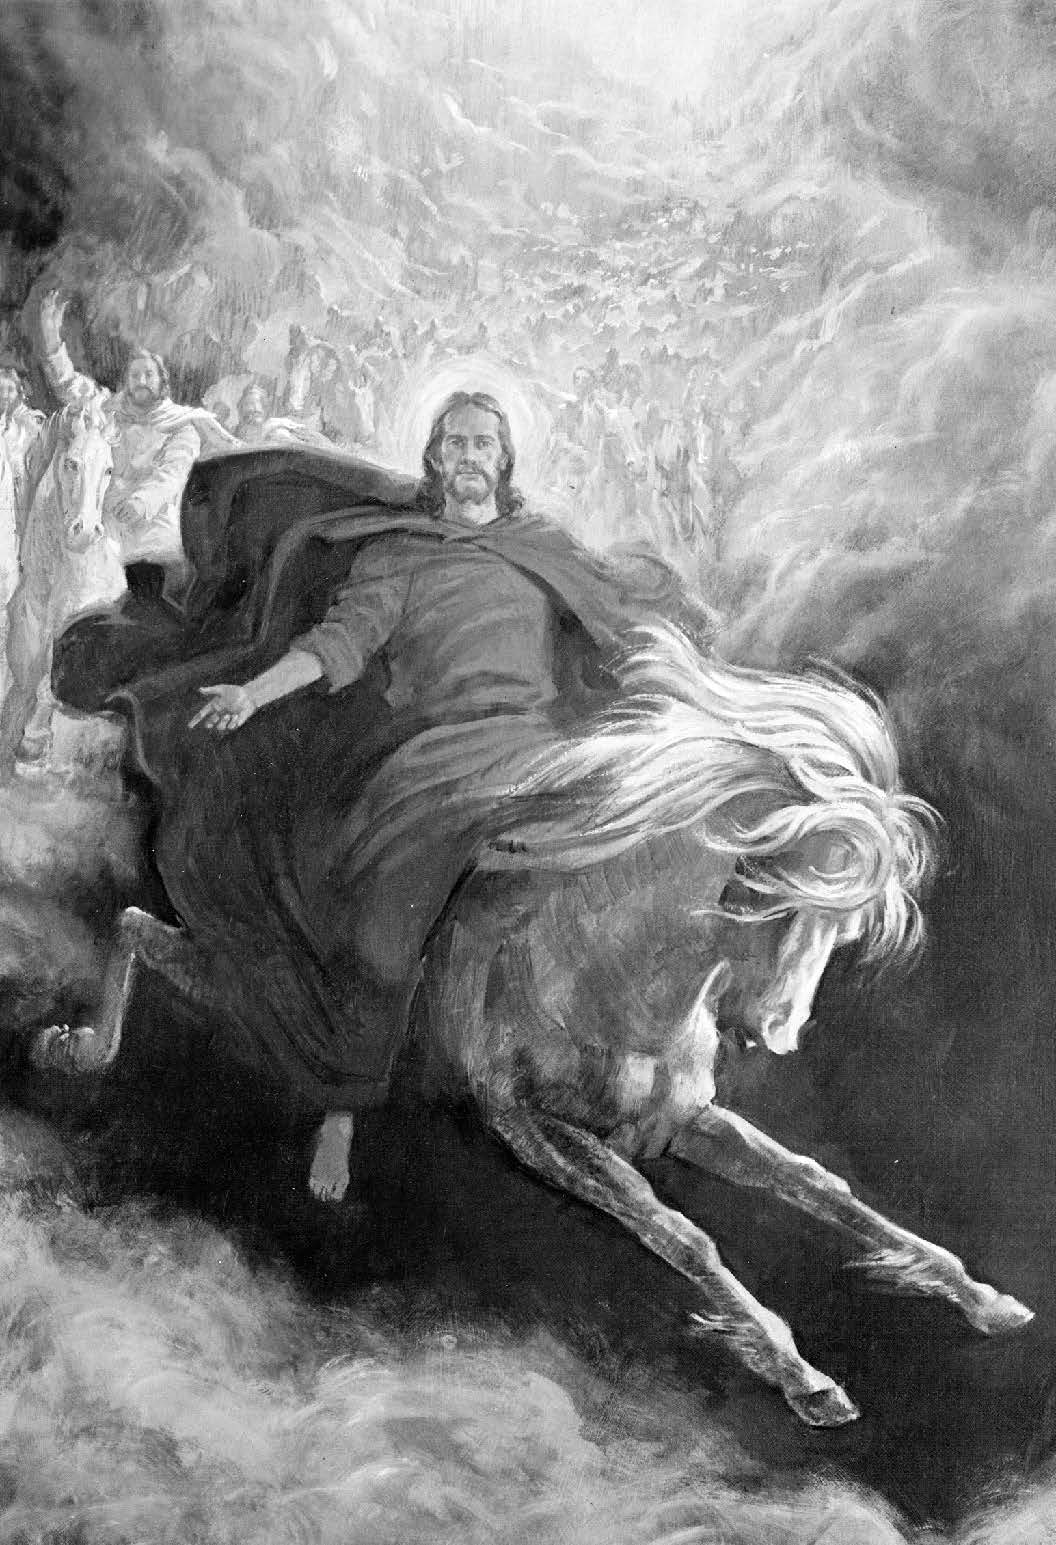 The book of Revelation was important enough to Joseph Smith that he took the time to ponder the book, identify questions that he had, and approach the Lord with those questions, providing a model (section 77) for how we can find resolutions to many of our own questions as we endeavor to understand the scriptures.